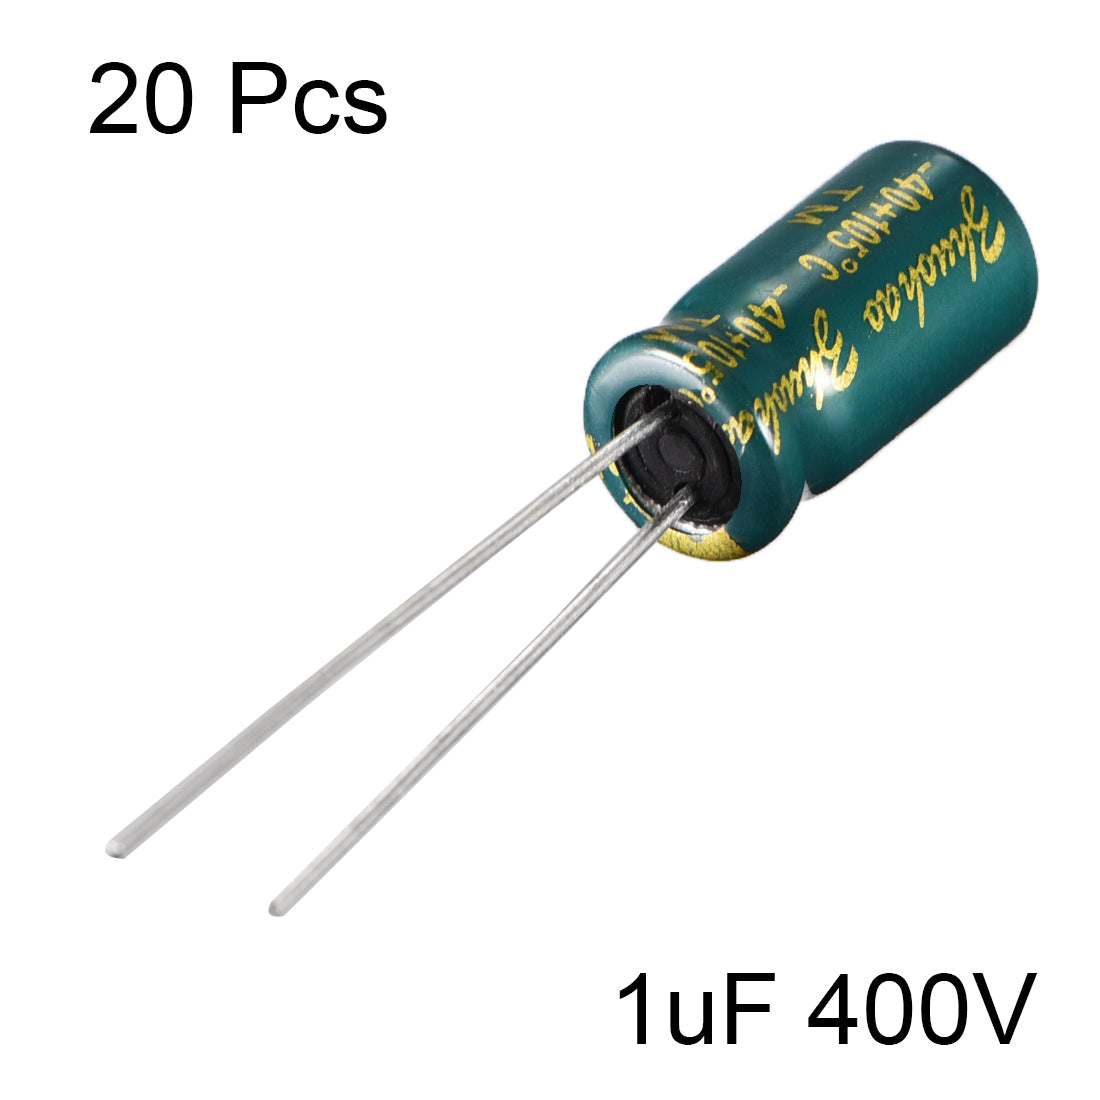 uxcell Uxcell Aluminum Radial Electrolytic Capacitor Low ESR Green with 1uF 400V 105 Celsius Life 3000H 6.3 x 12 mm High Ripple Current,Low Impedance 20pcs